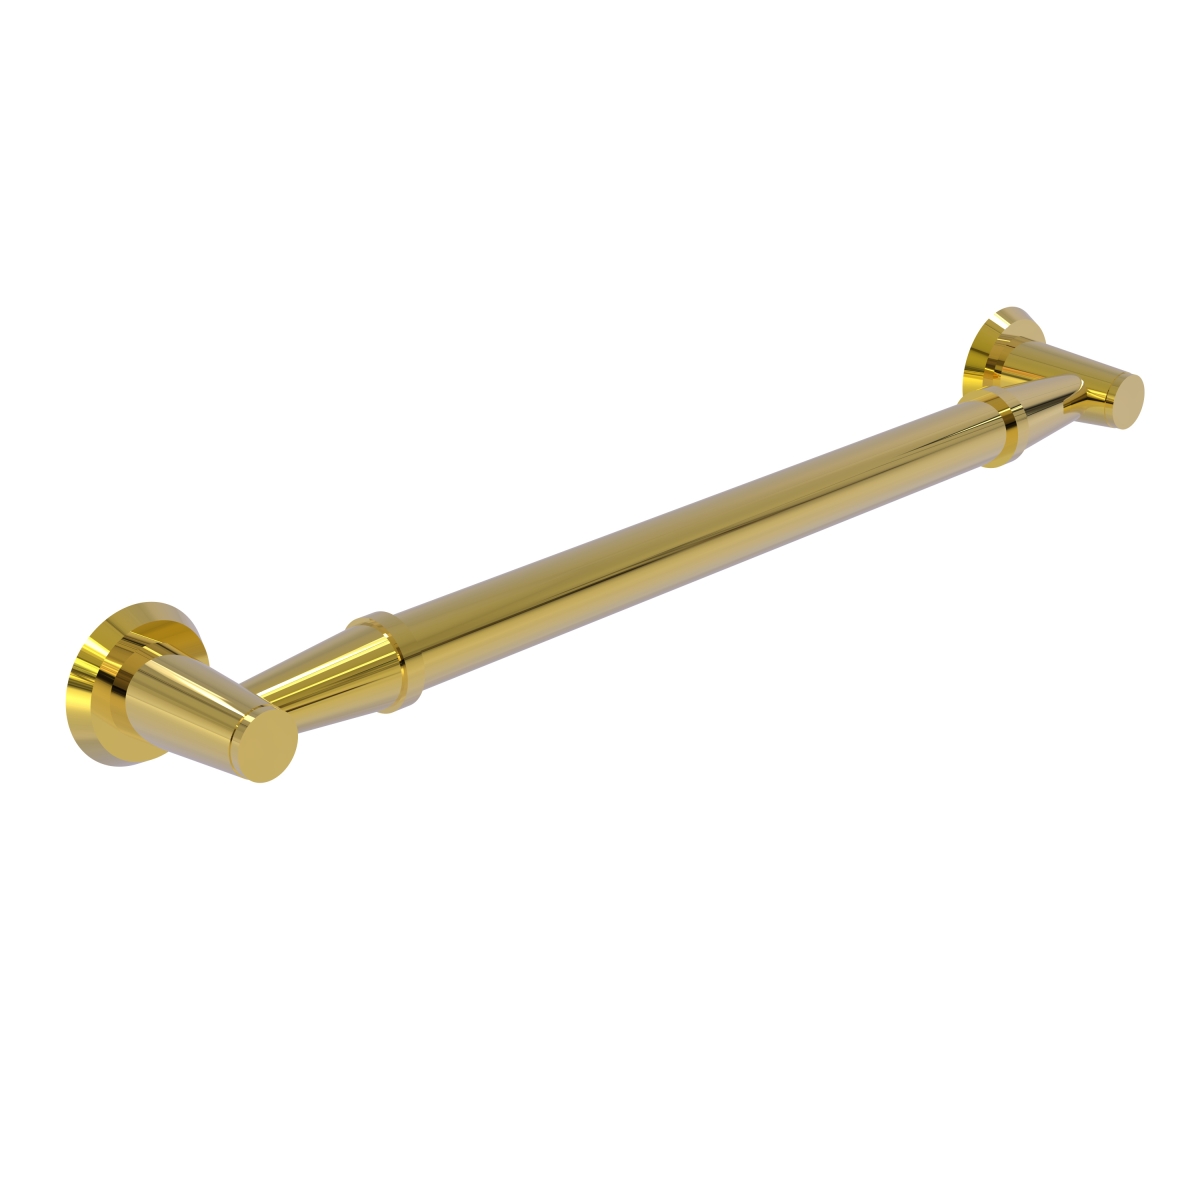 Picture of Allied Brass MD-GRS-16-PB 16 in. Grab Bar Smooth, Polished Brass - 3.5 x 18 x 16 in.